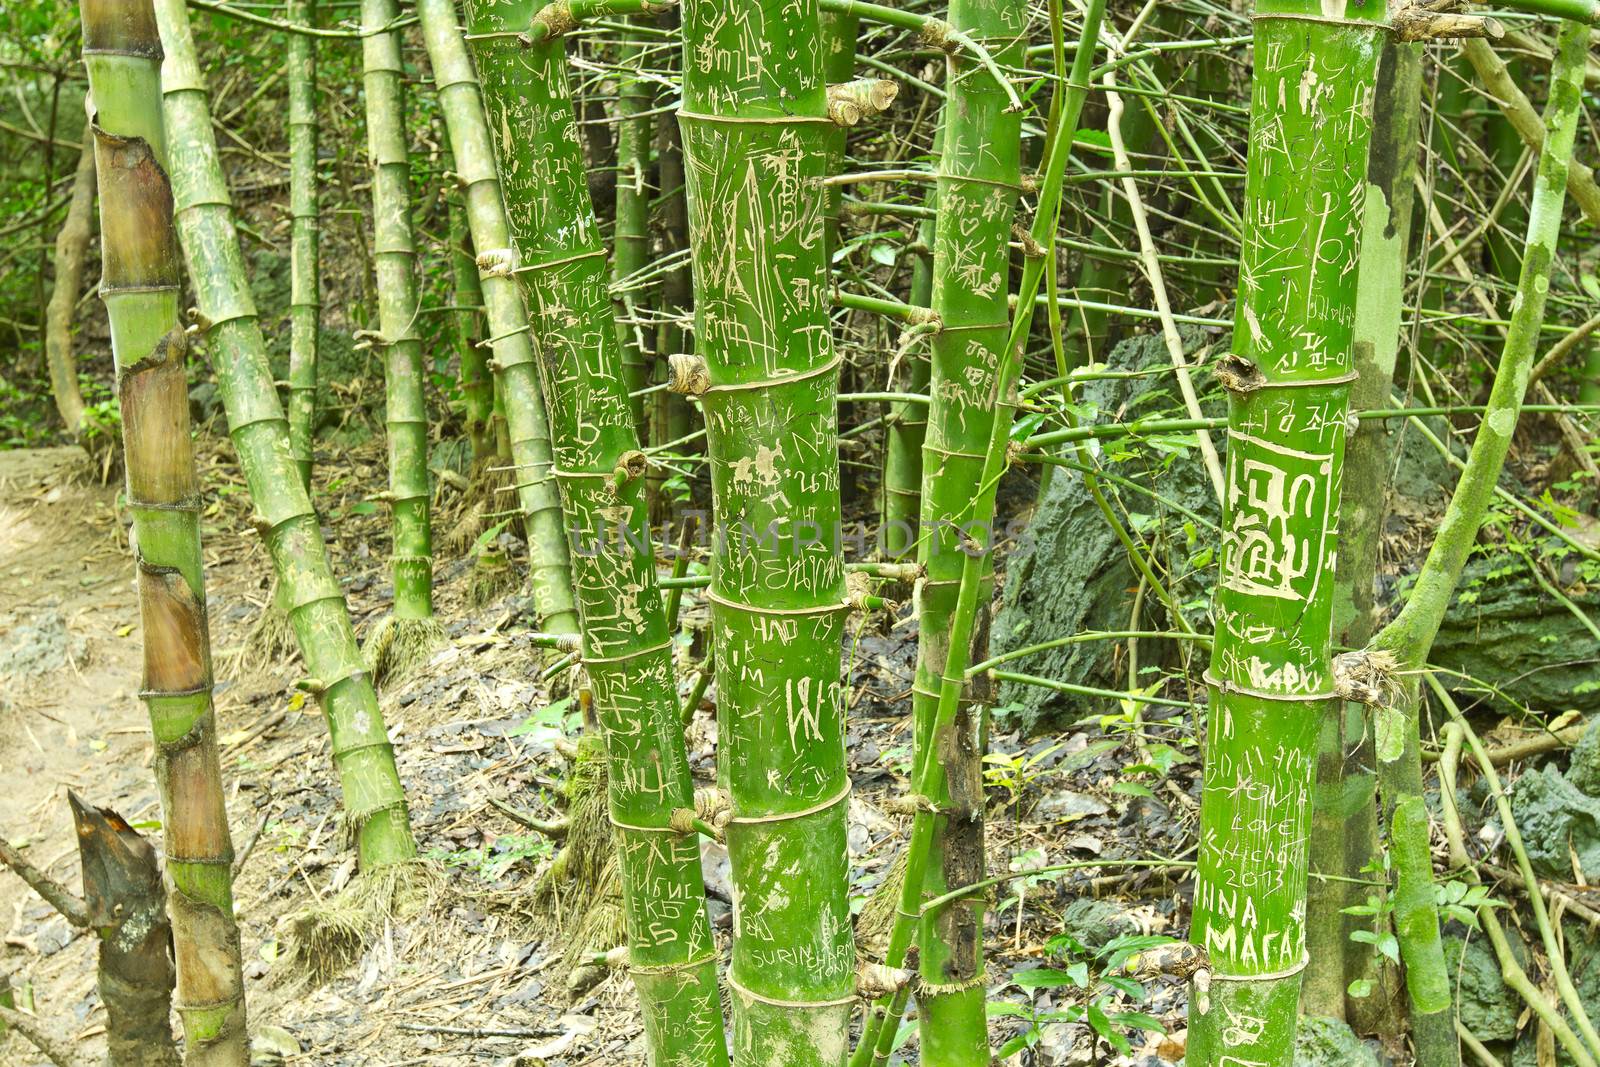 Naughtily arts on bamboo in the natural forest